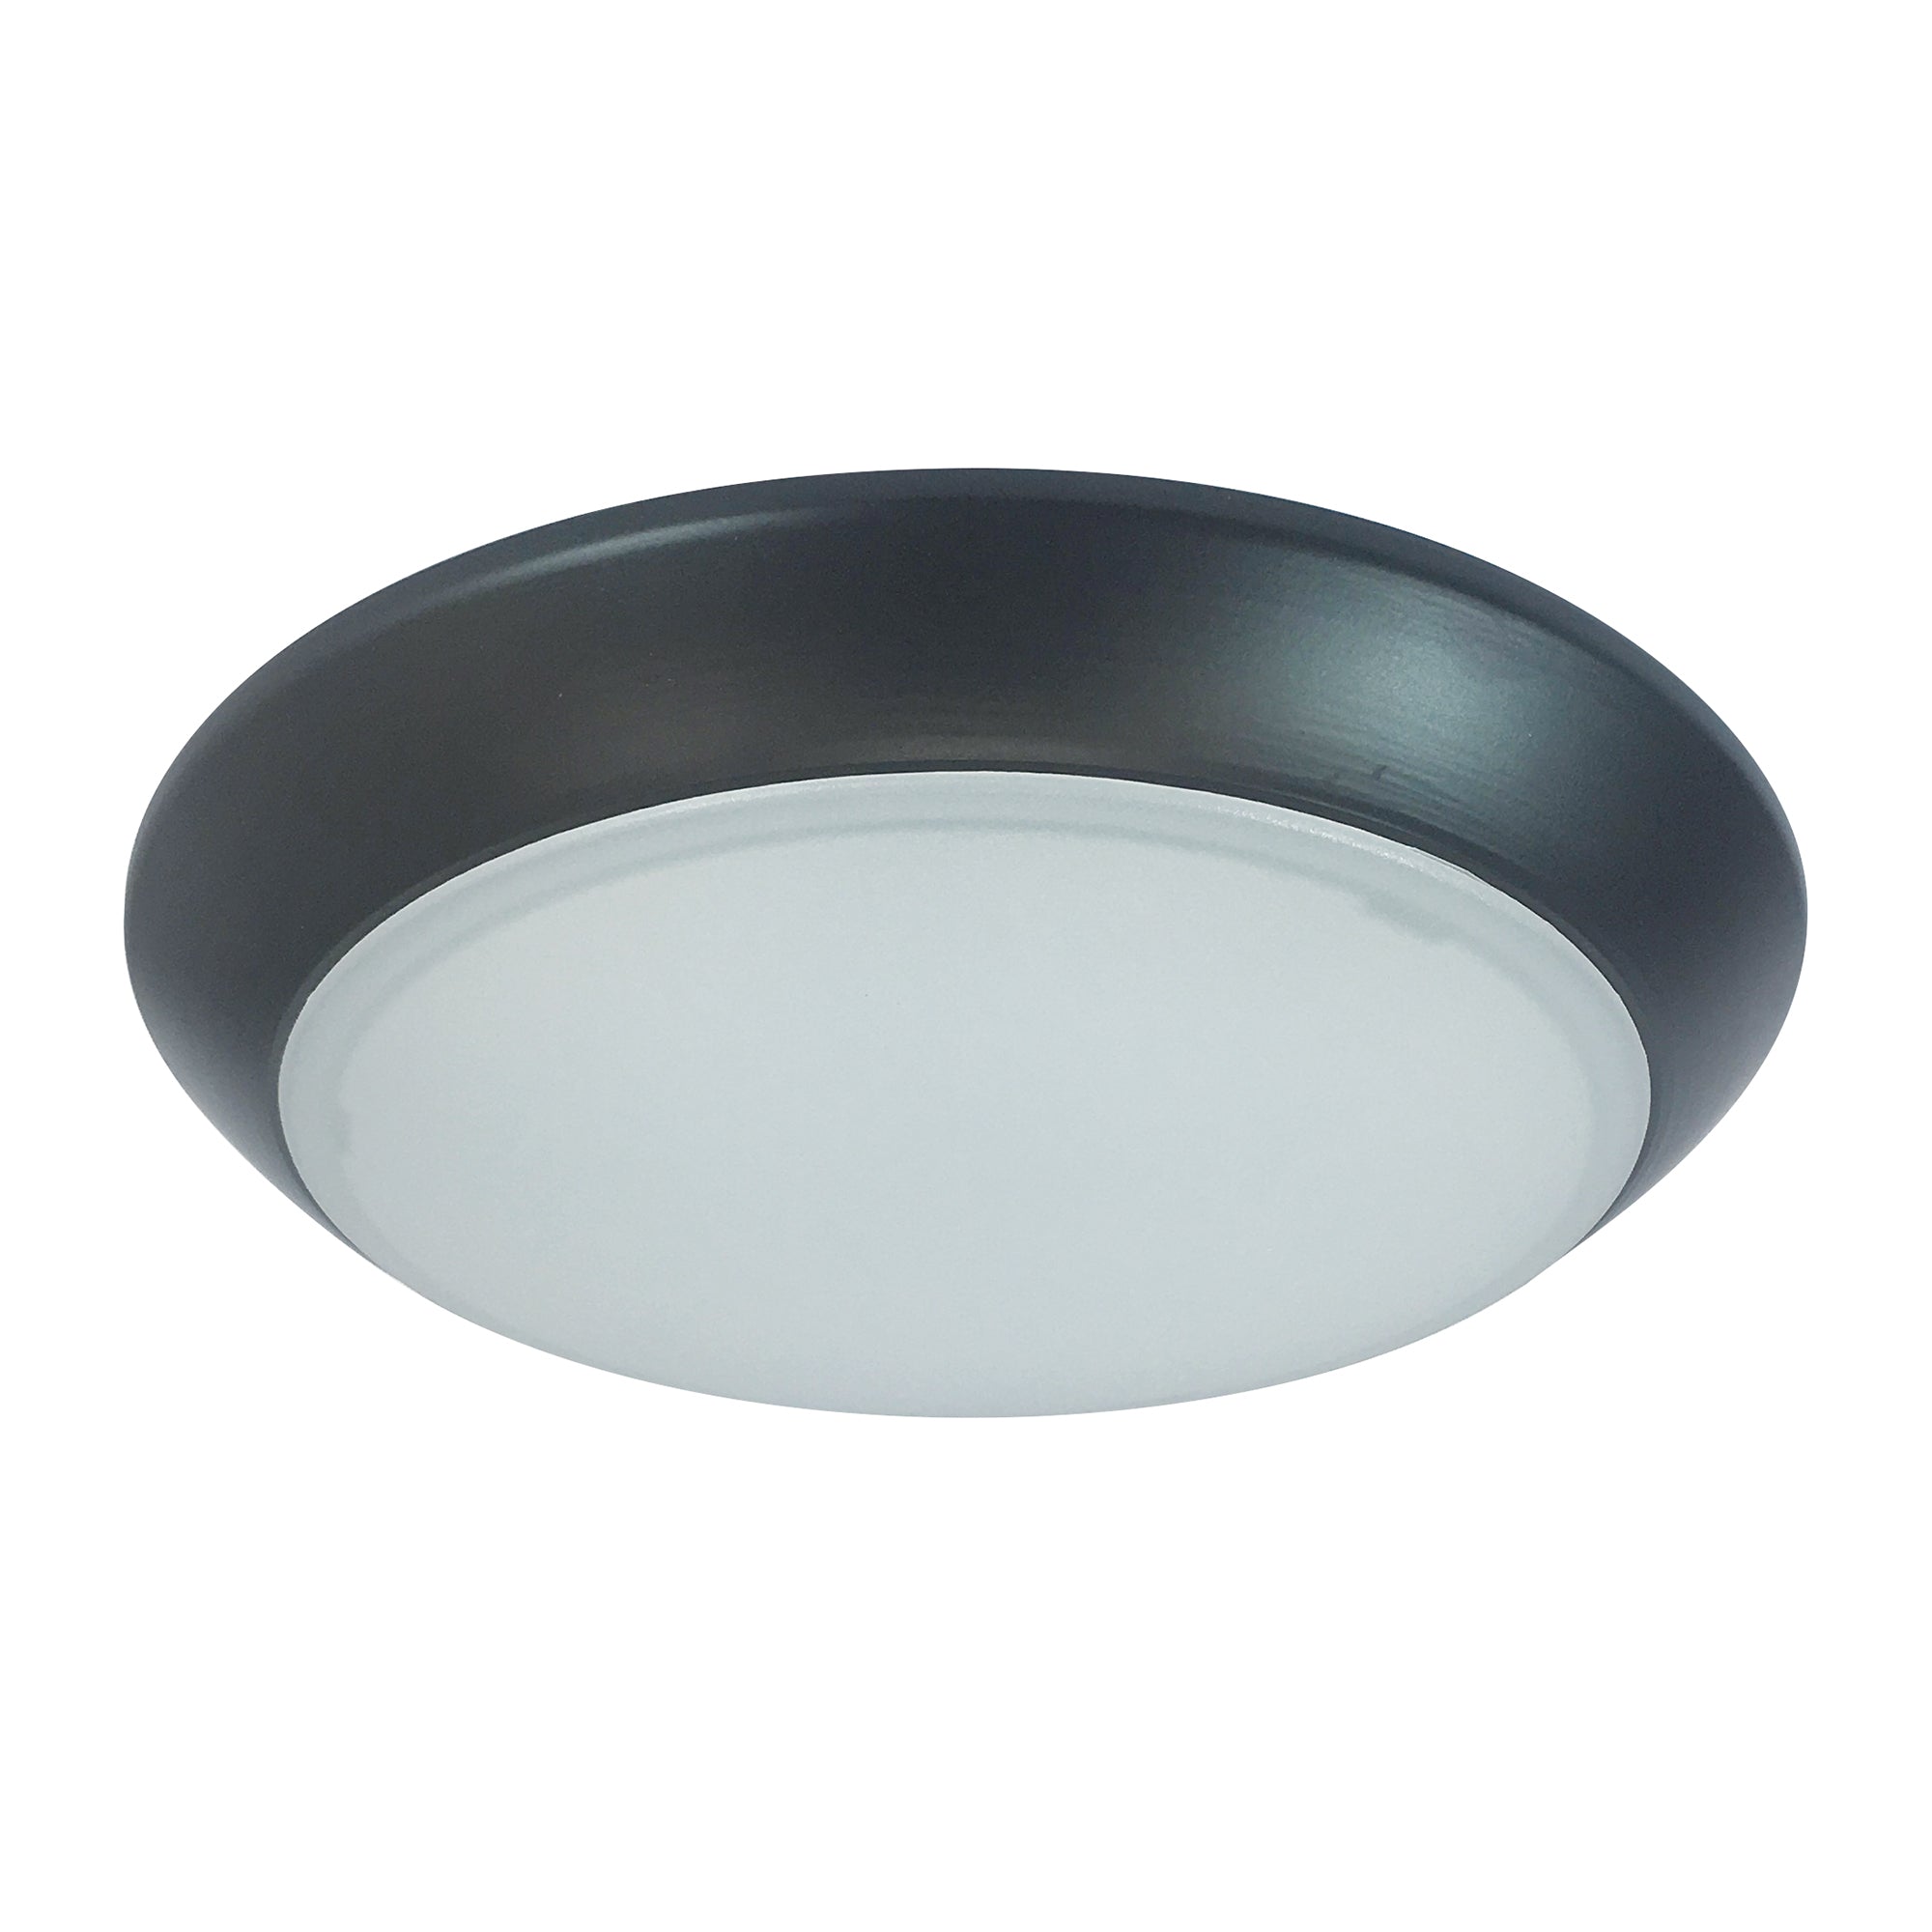 Nora Lighting NLOPAC-R8T2430BZ - Surface - 8 Inch AC Opal LED Surface Mount, 2150lm / 32W, 3000K, Bronze finish